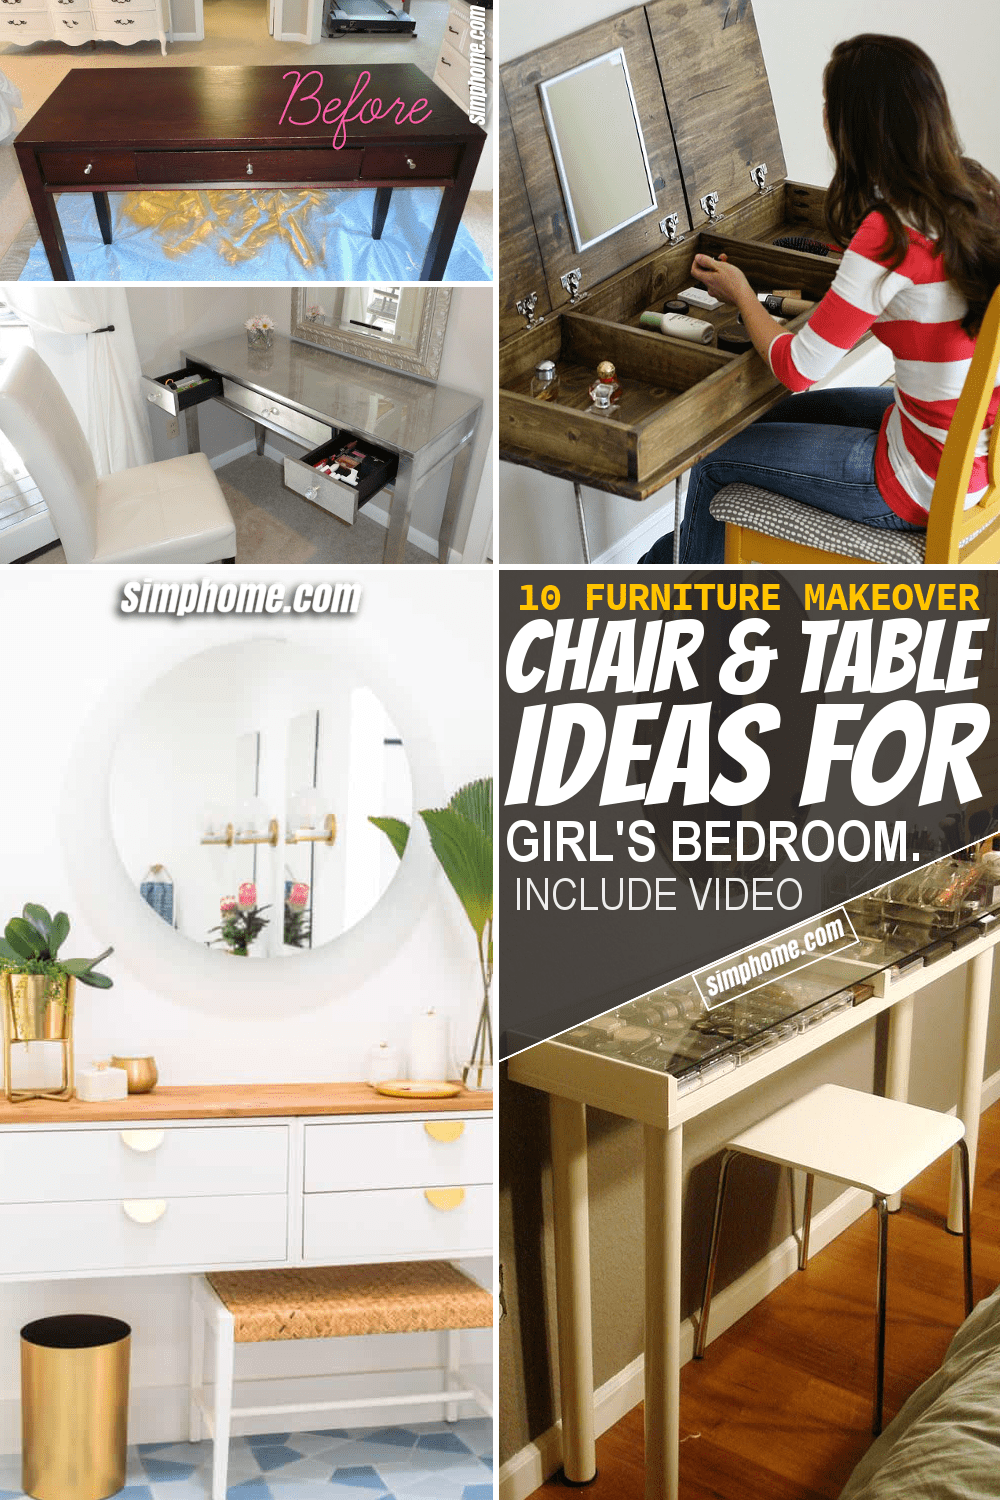 Simphome.com 10 Chair and Table Ideas for Girls Bedrooms Featured Image Long 1